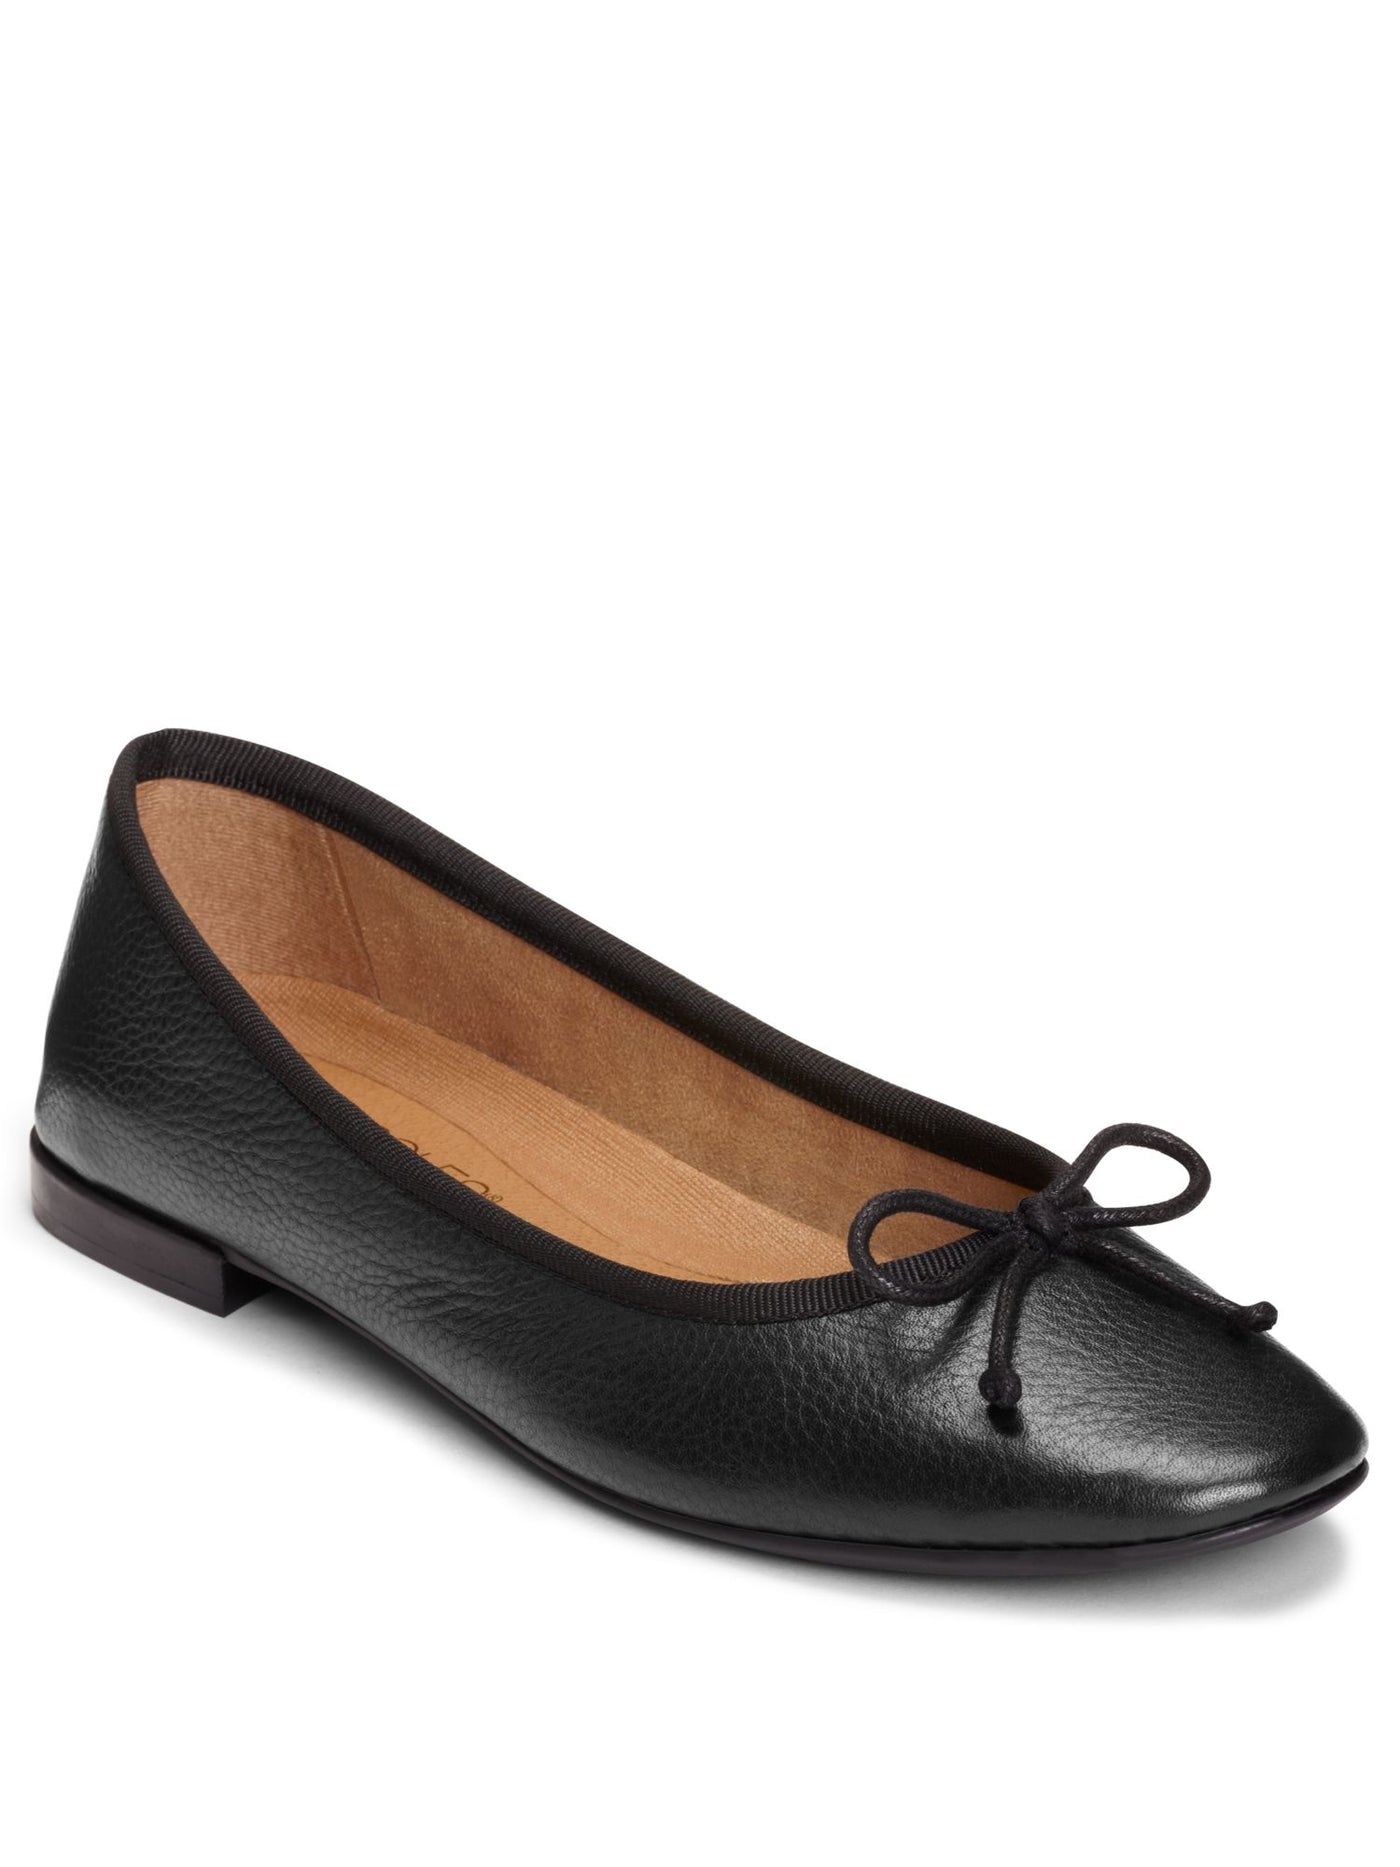 AEROSOLES MARTHA STEWART Womens Black Padded Bow Accent Removable Insole Homerun Round Toe Slip On Leather Ballet Flats 10 M